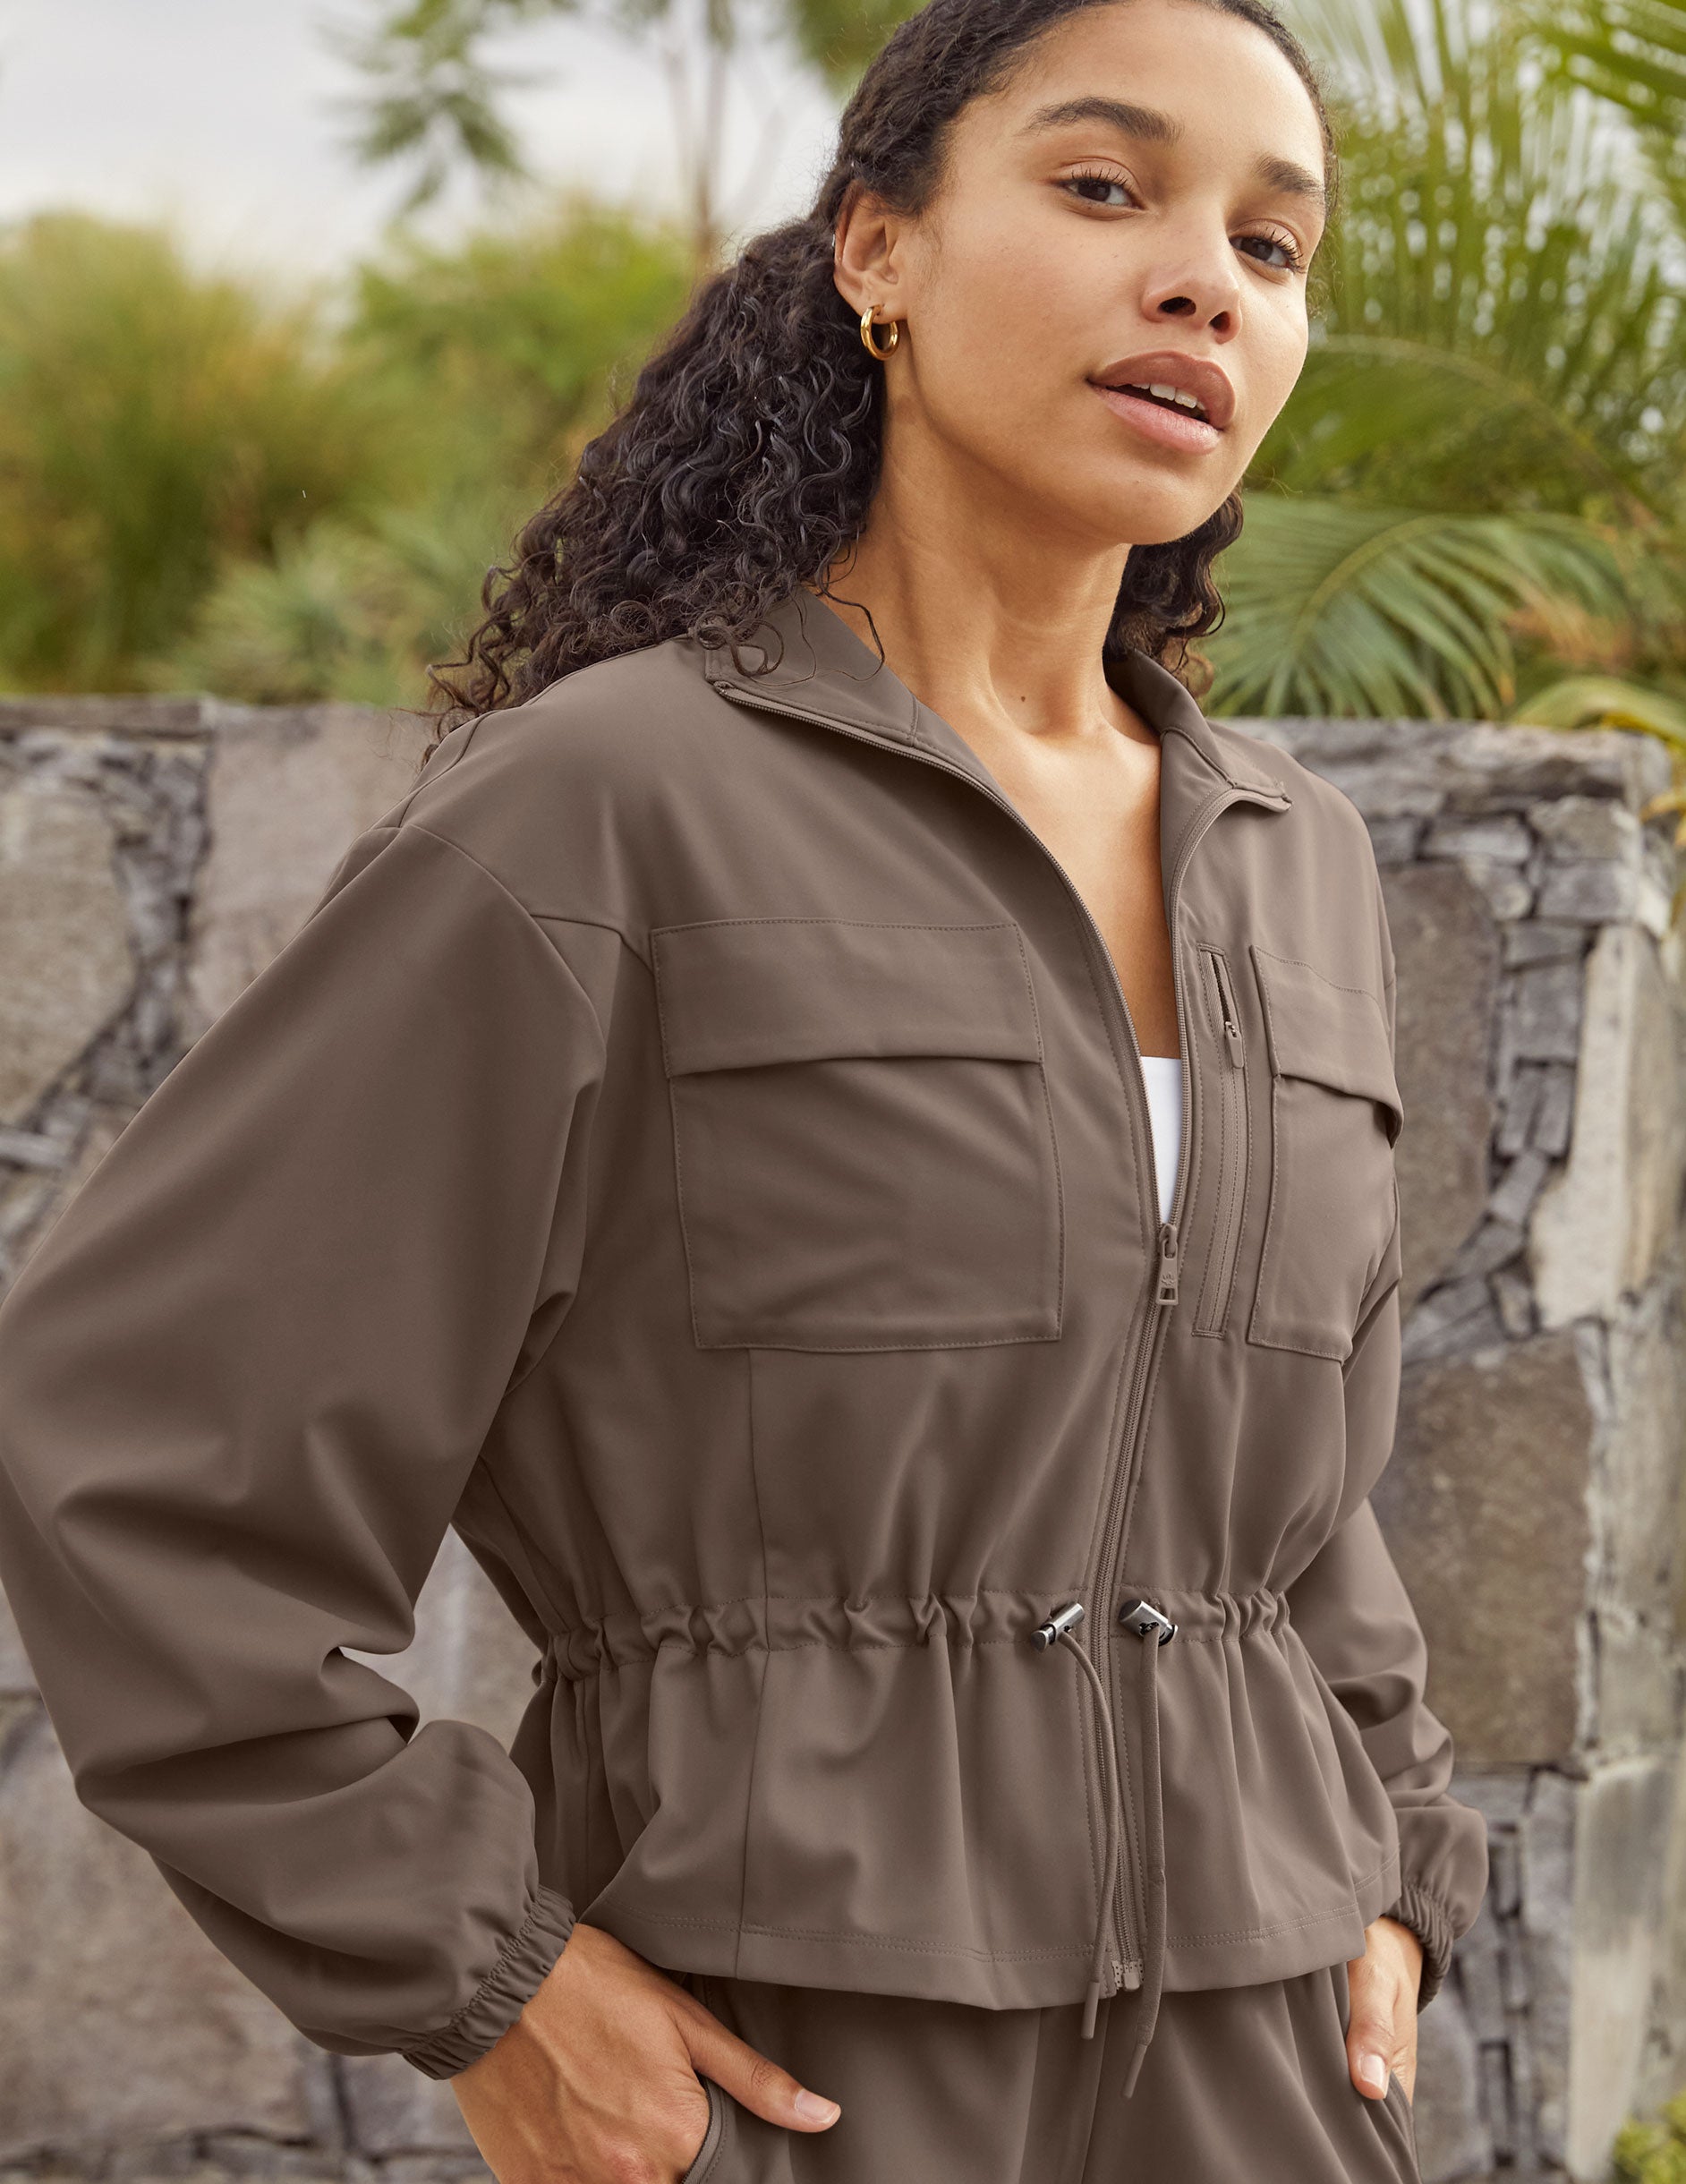 brown cargo style zip-up jacket with a drawstring tie at waist and pockets. 